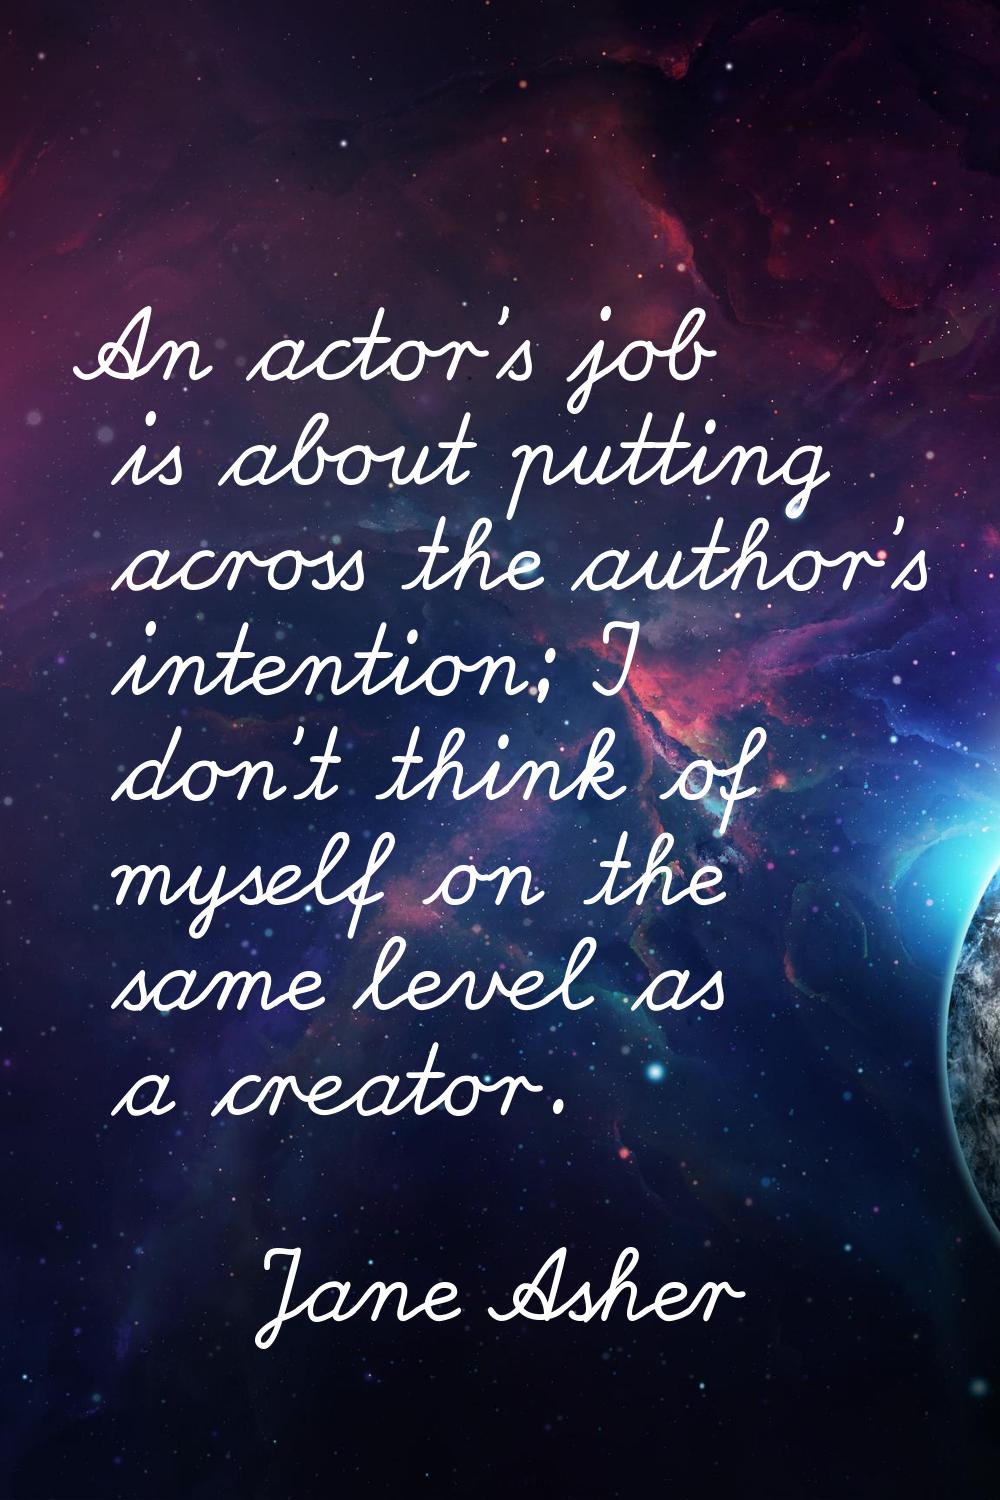 An actor's job is about putting across the author's intention; I don't think of myself on the same 